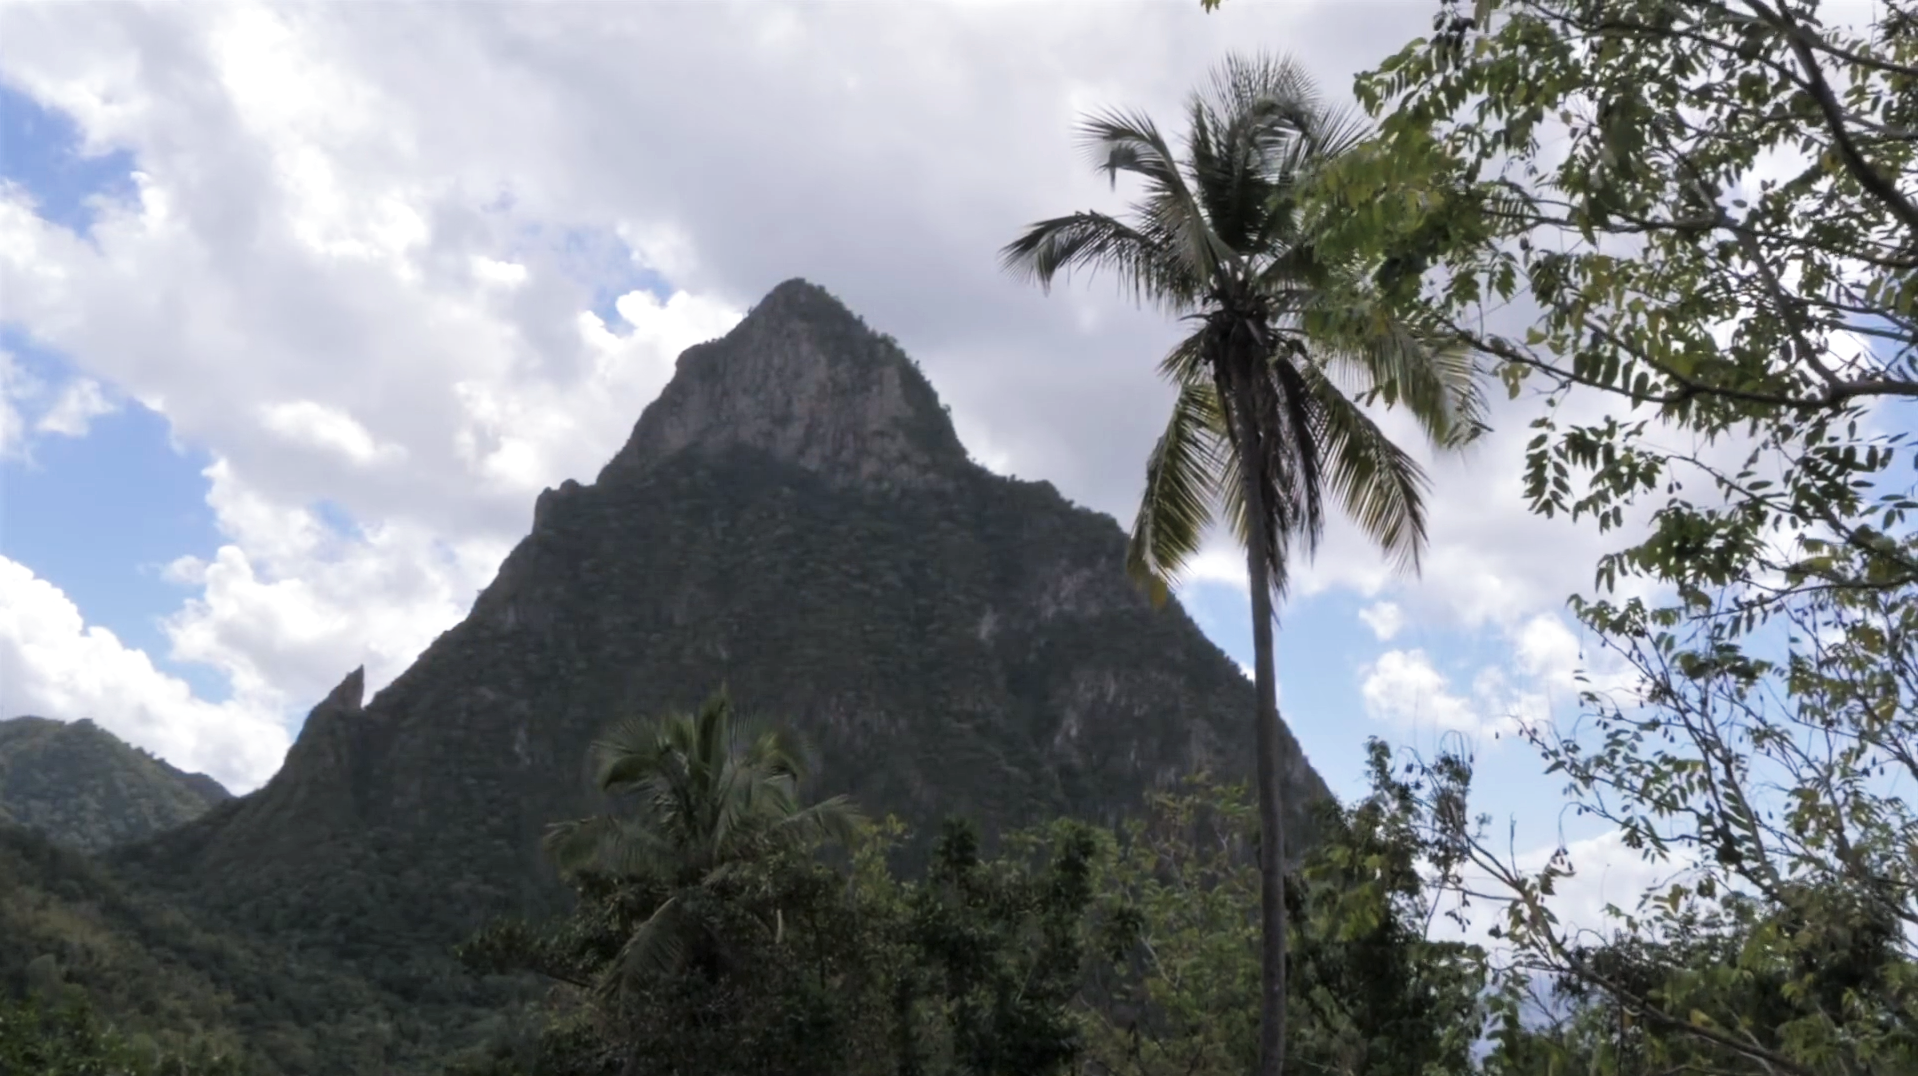 St. Lucia's Jade mountain rises in the background against a cloudy sky. Palm trees can be seen in the foreground.